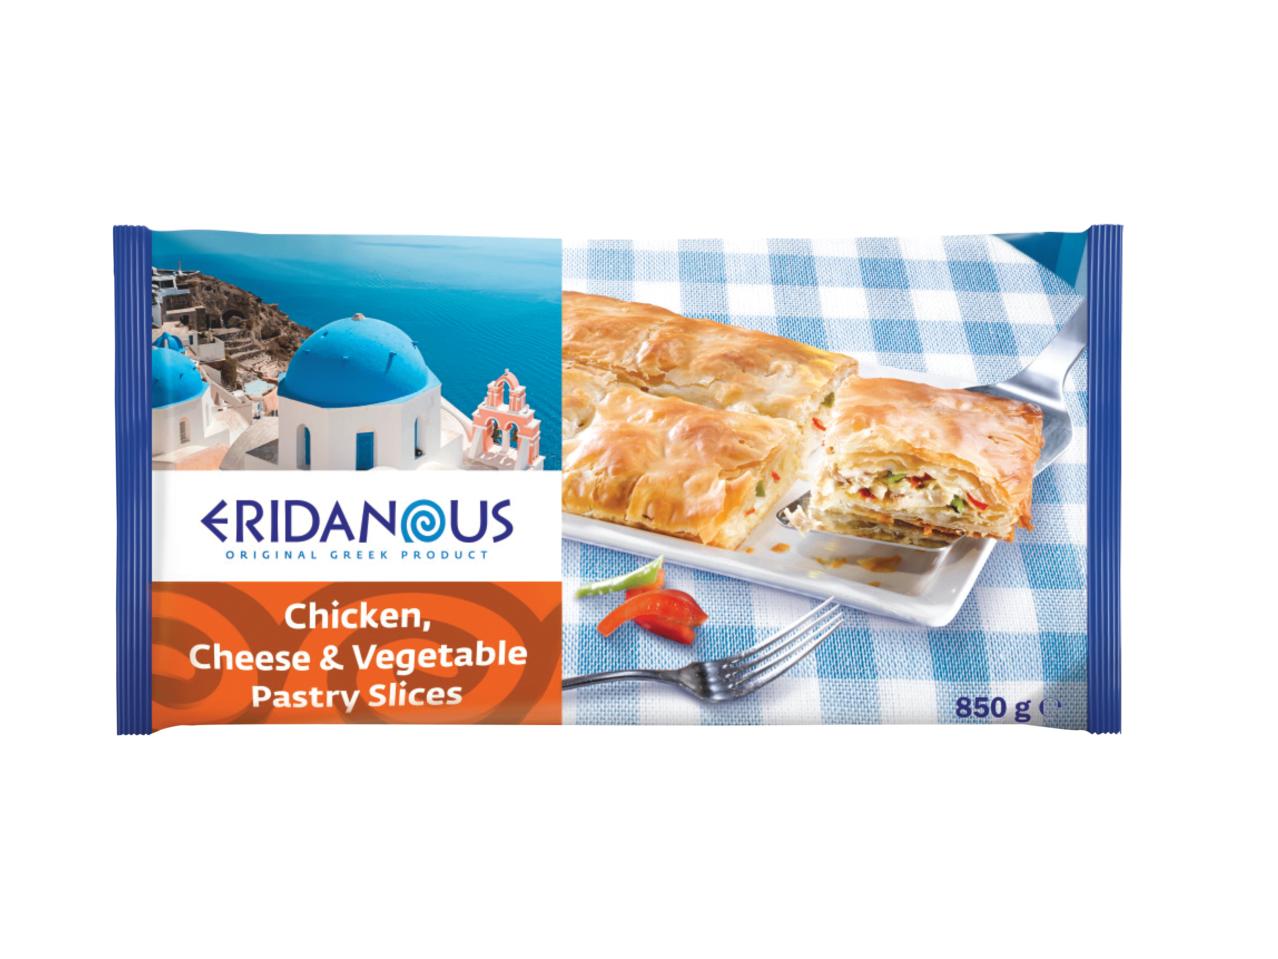 ERIDANOUS Chicken, Cheese & Vegetable Pastry Slices